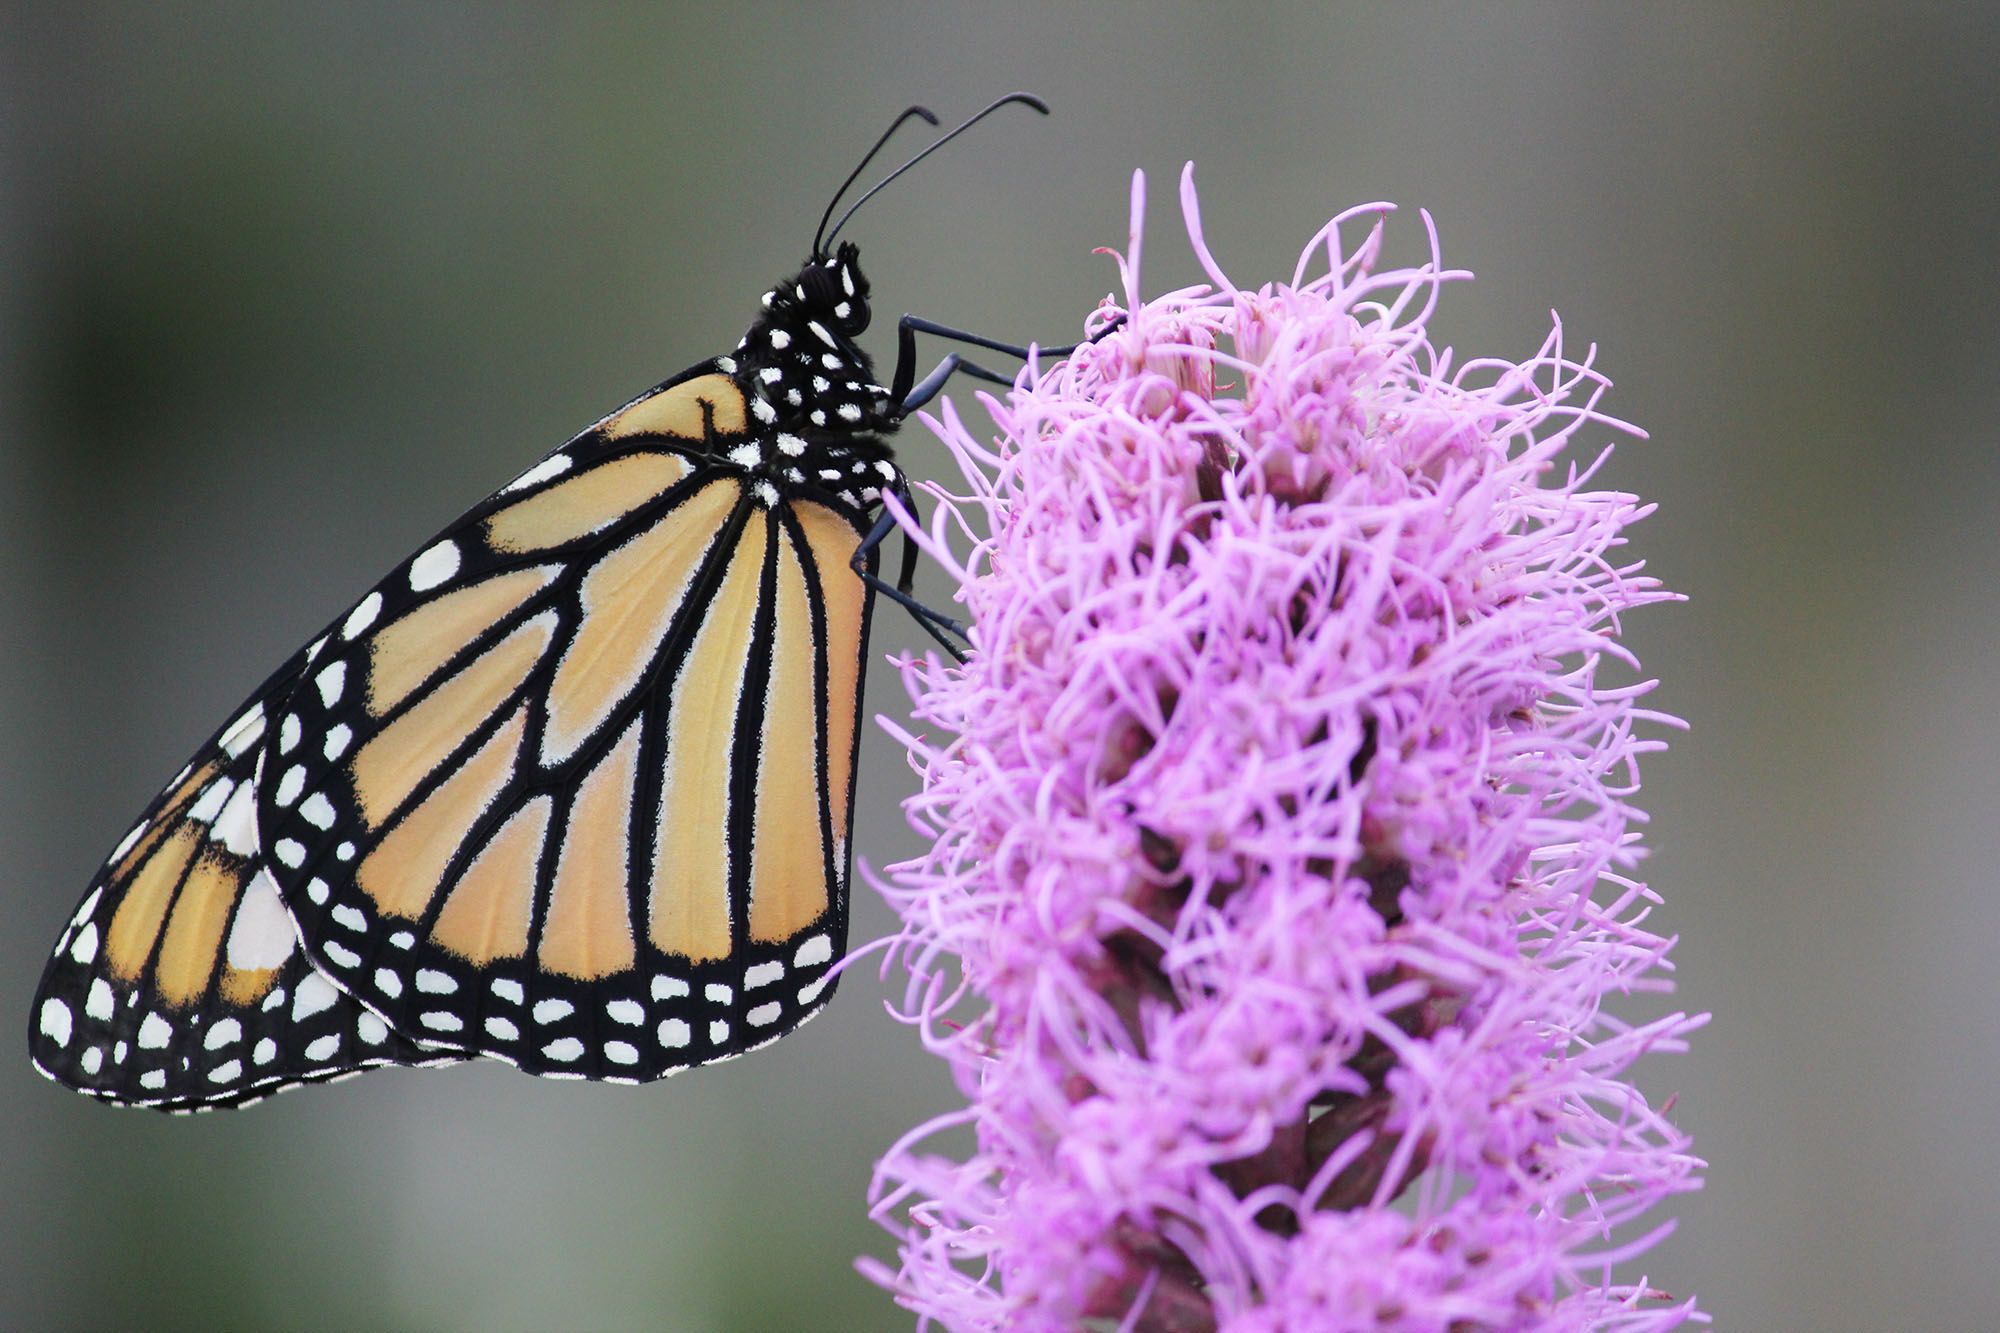 A side view of a monarch butterfly with wings folded, resting on a spiky pink flower.